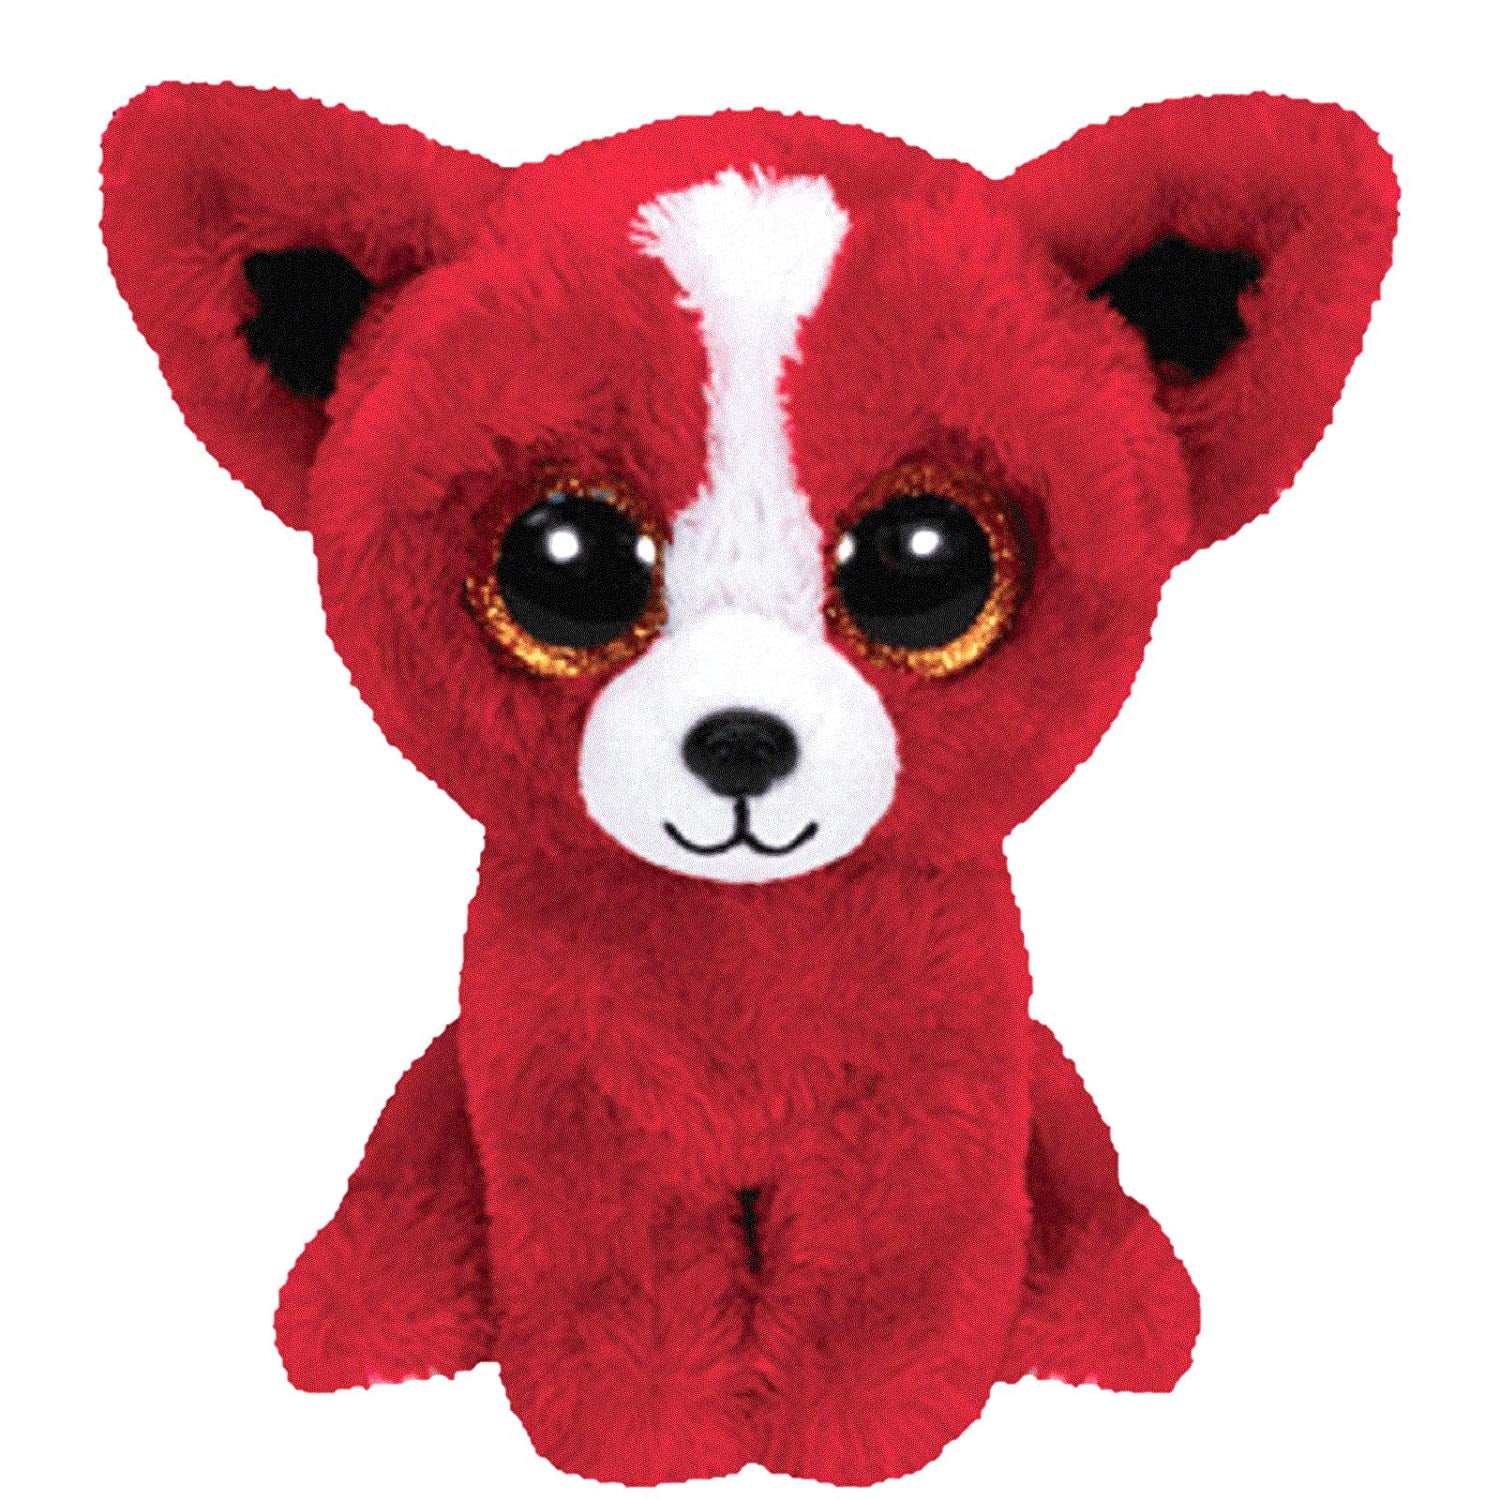 TY Beanie Boos - Boos The Tomato - Chihuahua Dog (Toy Fair Exclusive)  (Glitter Eyes) Small 6" Plush